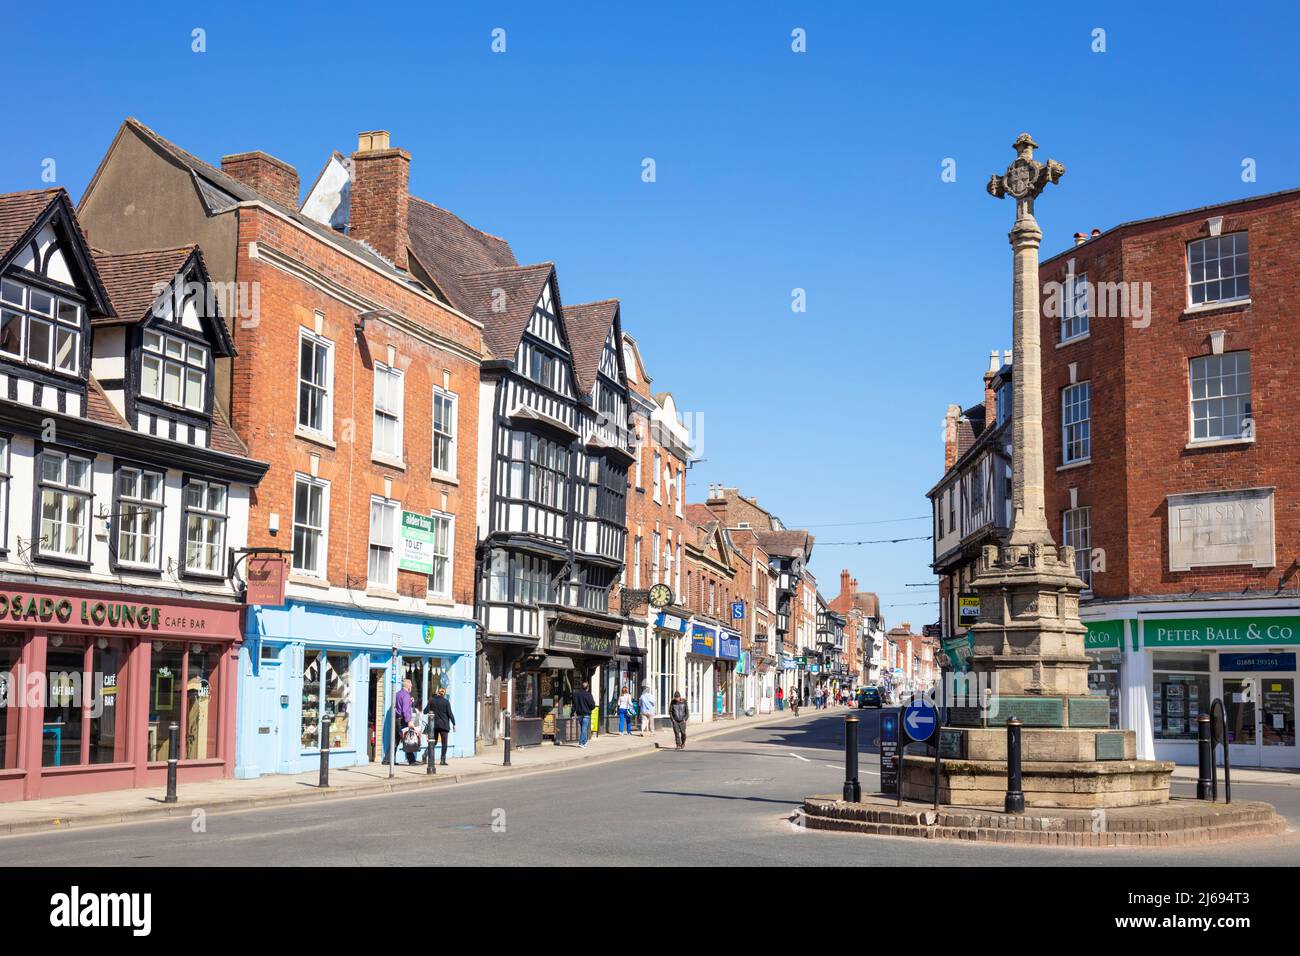 Tewkesbury Town centre shops and the Tewkesbury War Memorial (The Cross), Tewkesbury, Gloucestershire, England, United Kingdom Stock Photo